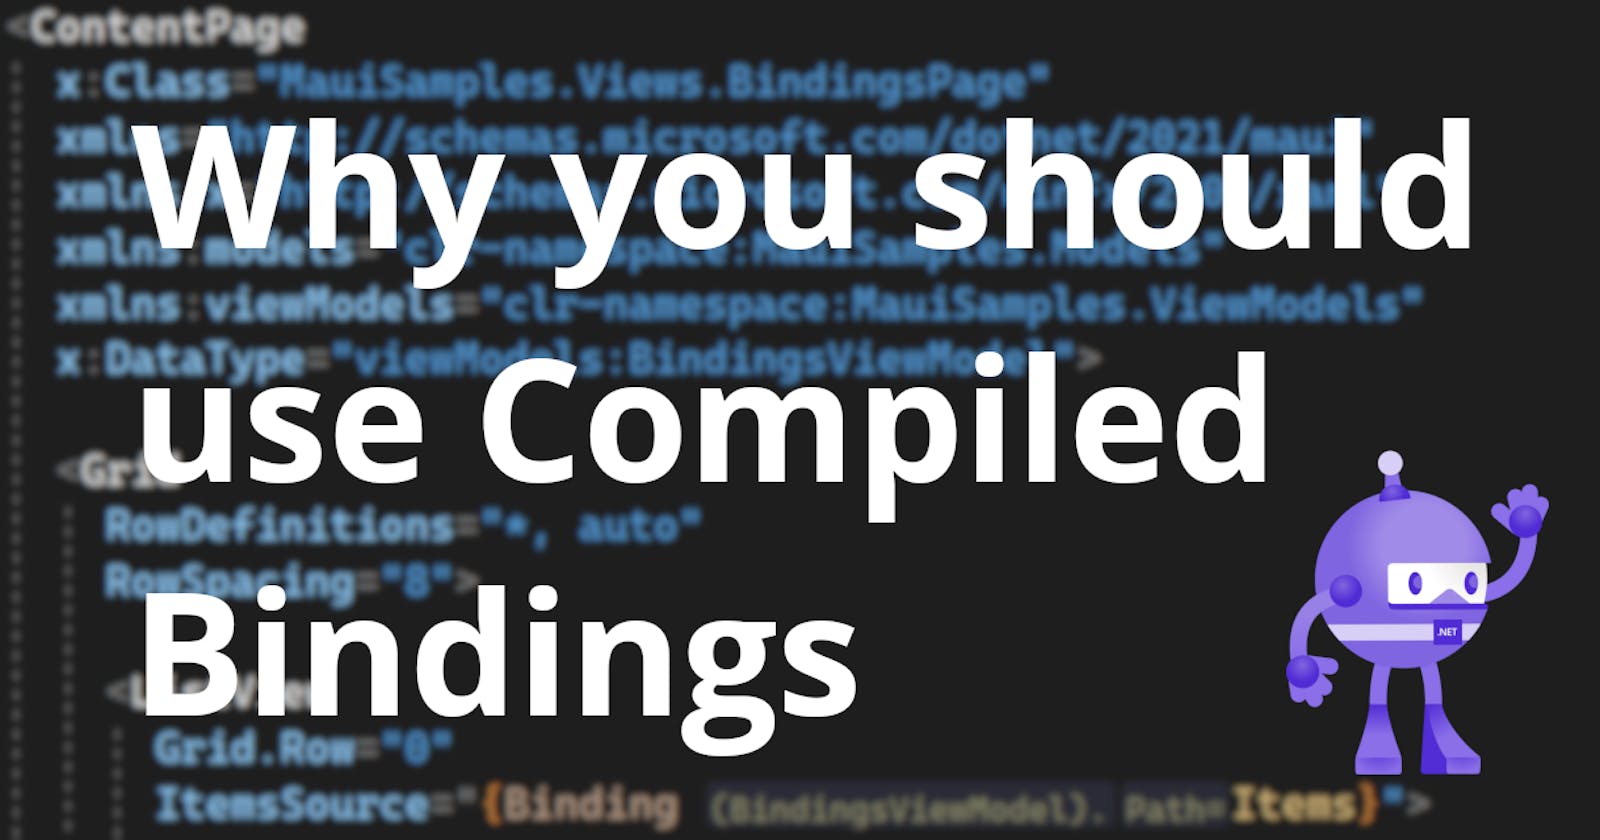 A quick introduction to Compiled Bindings in .NET applications and why you should use them